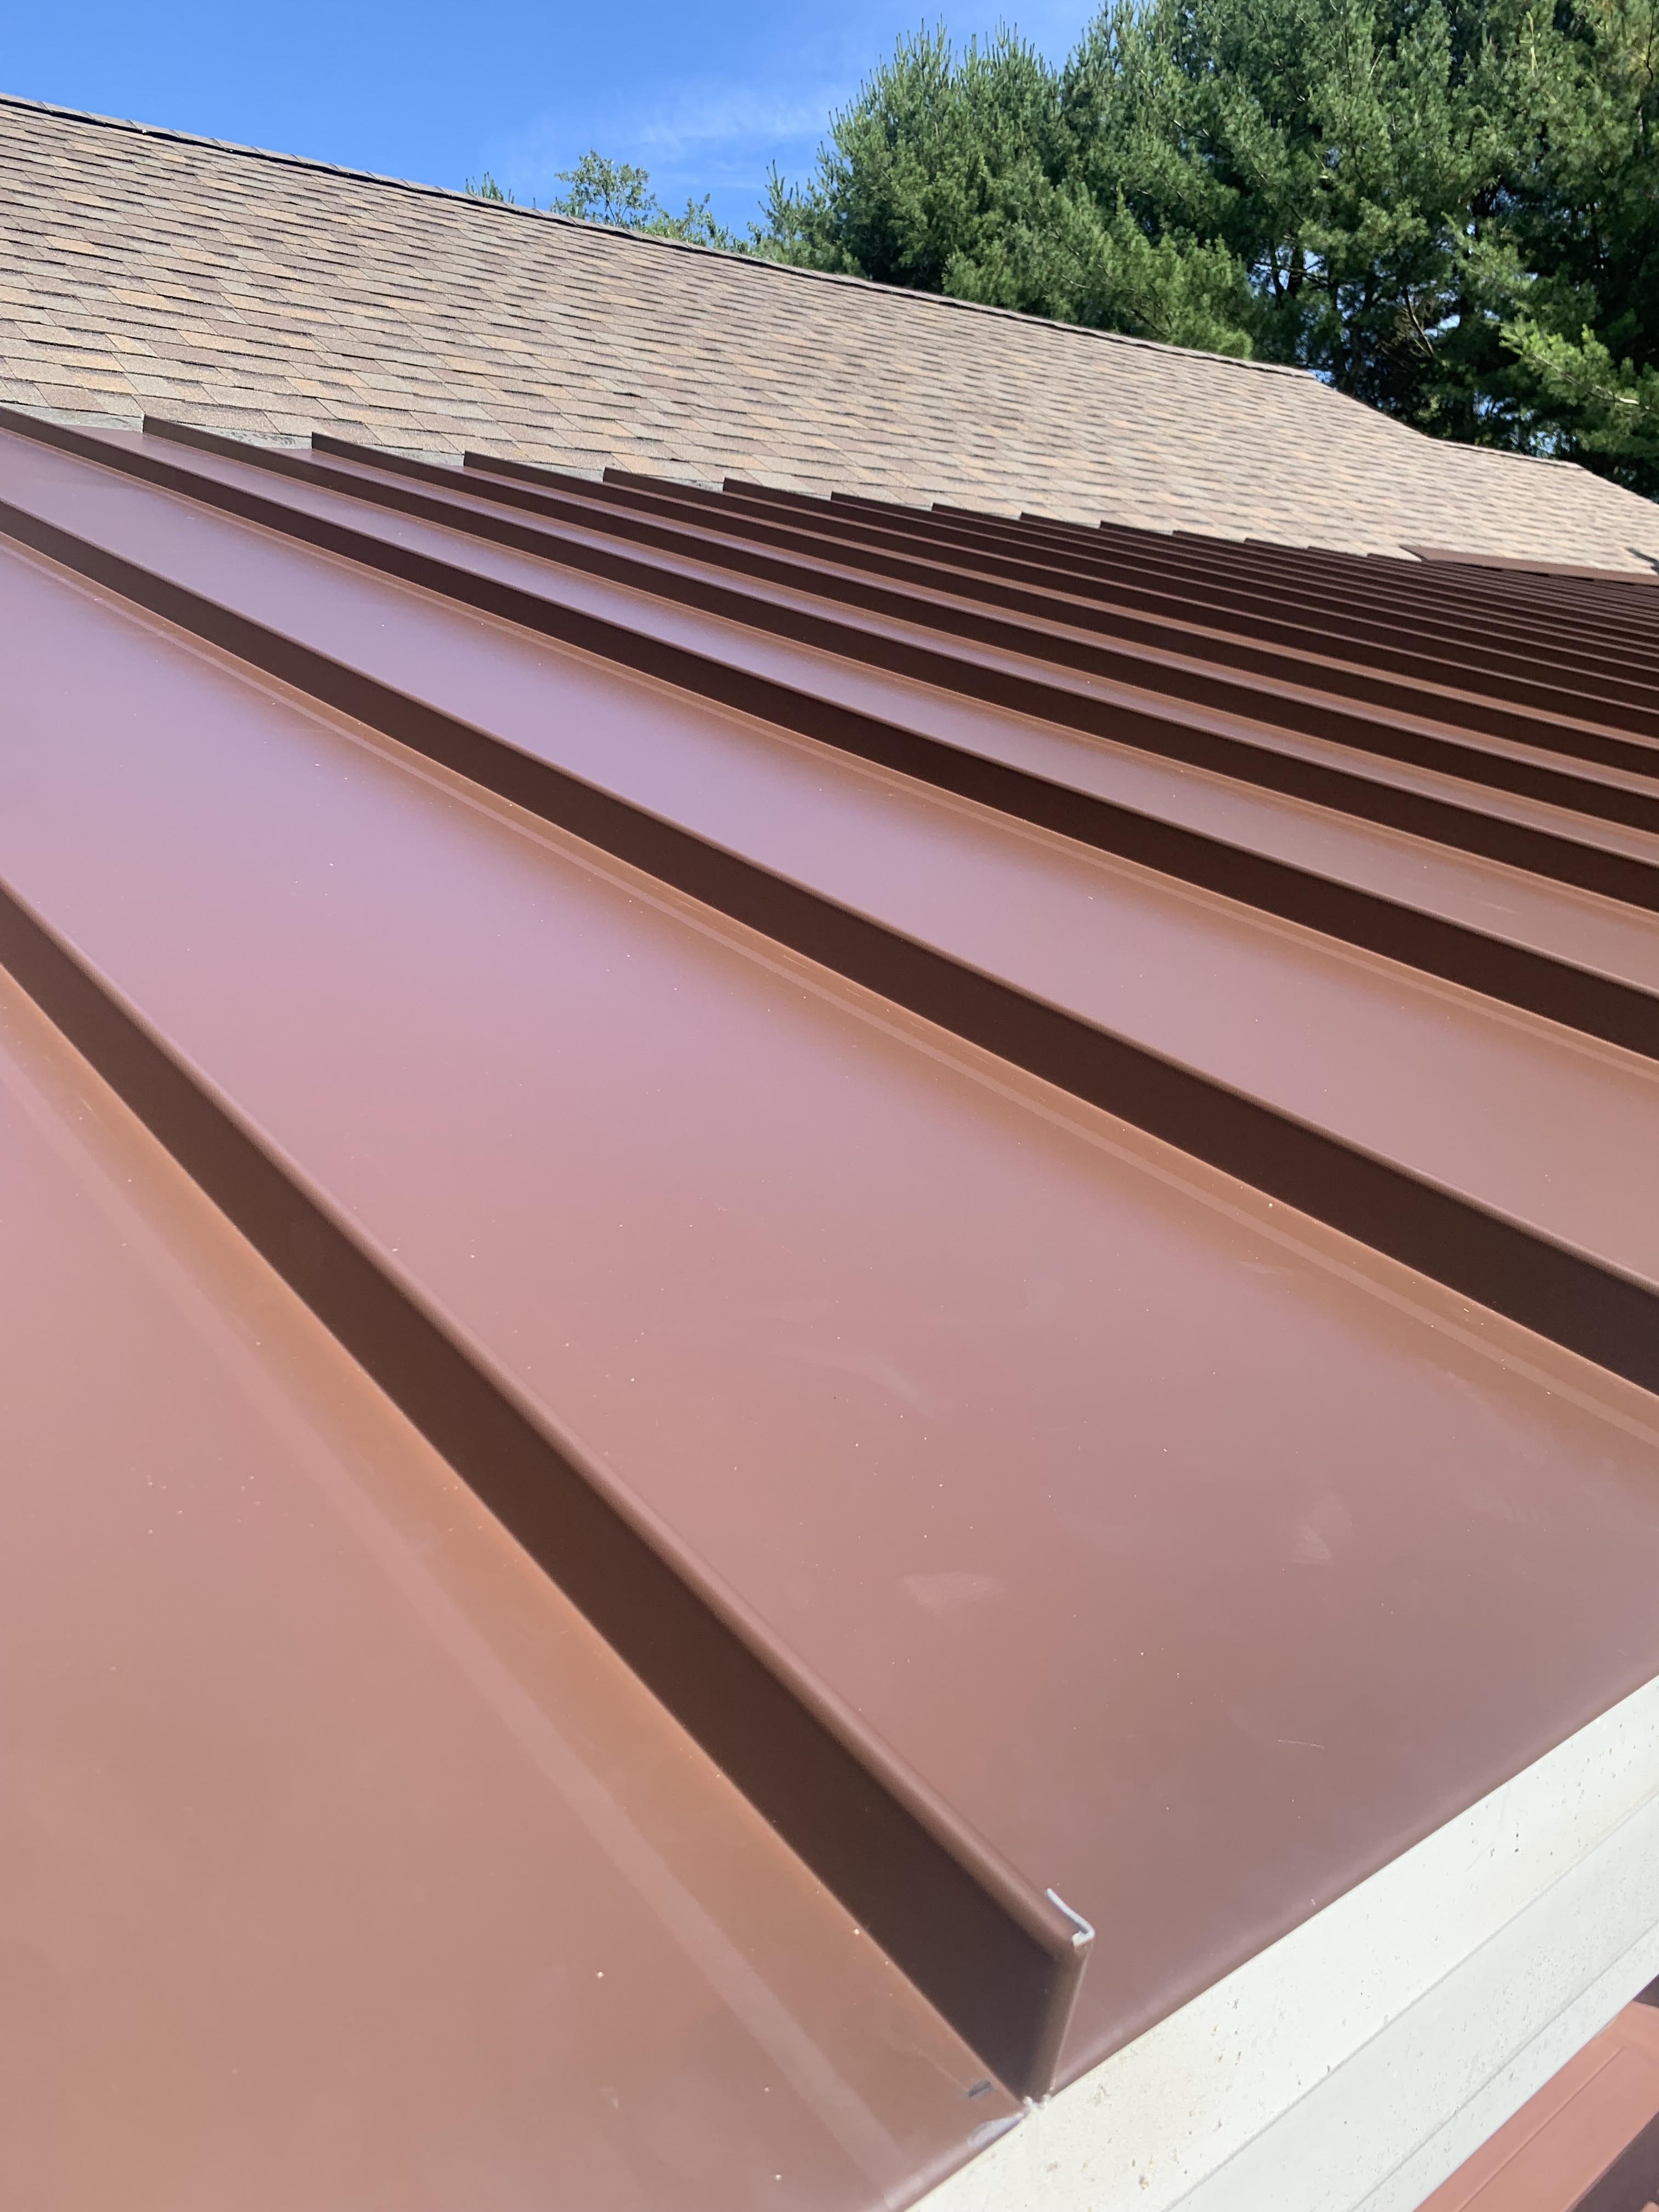 Metal Roofing Installation Installed By Our Company: Seapoint Roofing and Siding Top Quality Metal Roofing Installation In Ocean City, NJ